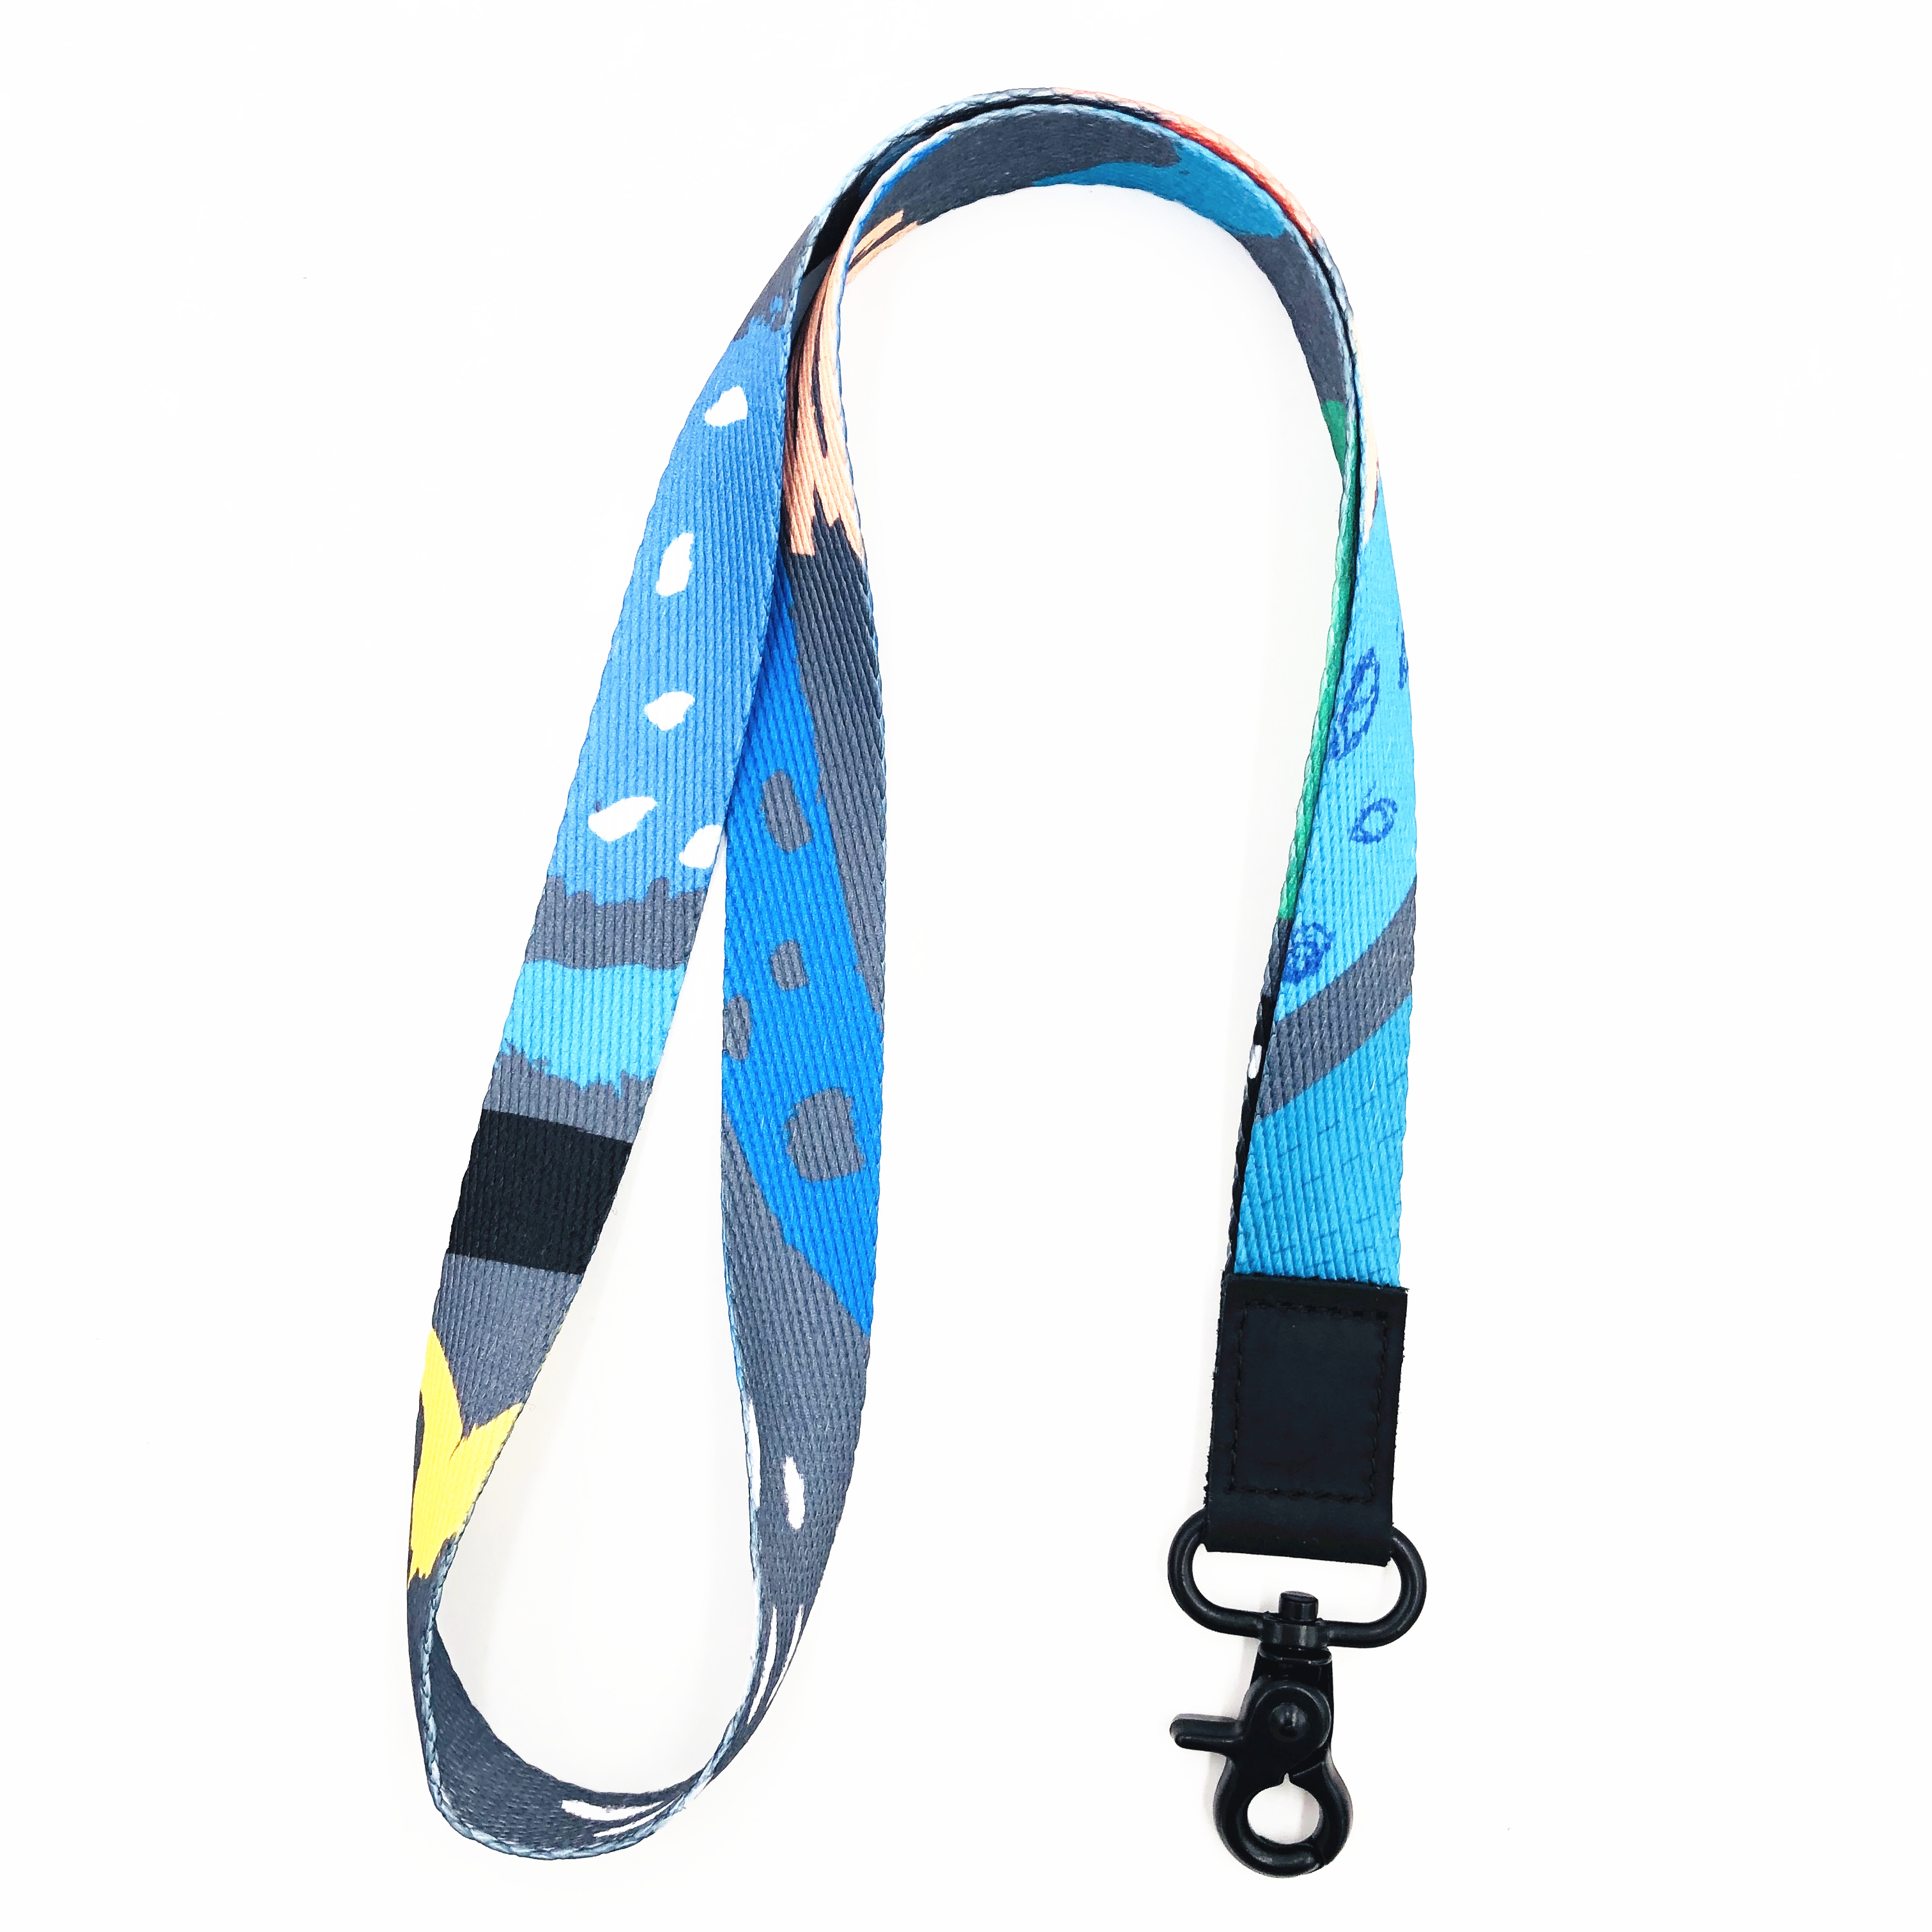 Durable and Premium Quality Key Lanyard for Women with ID Badge Holders